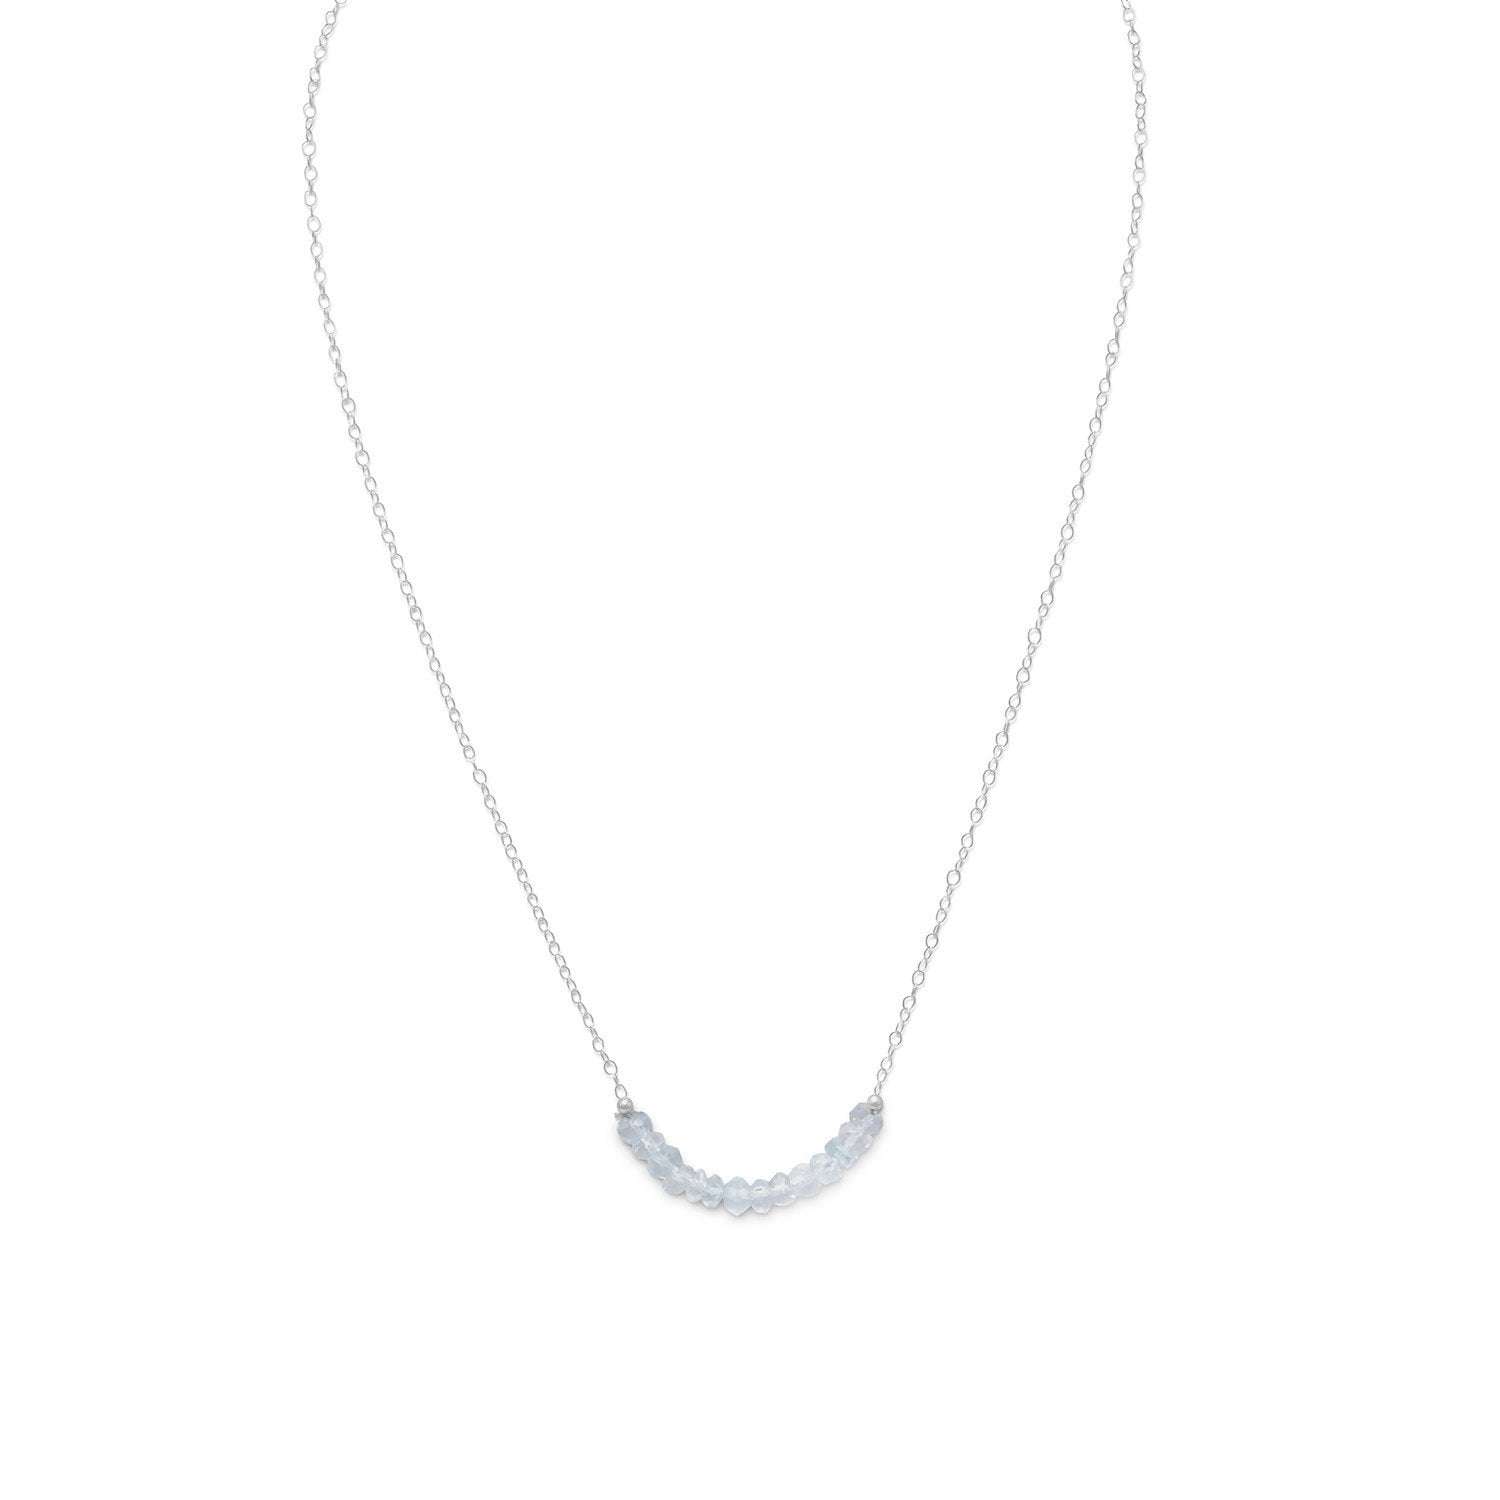 Faceted Aquamarine Bead Necklace - March Birthstone